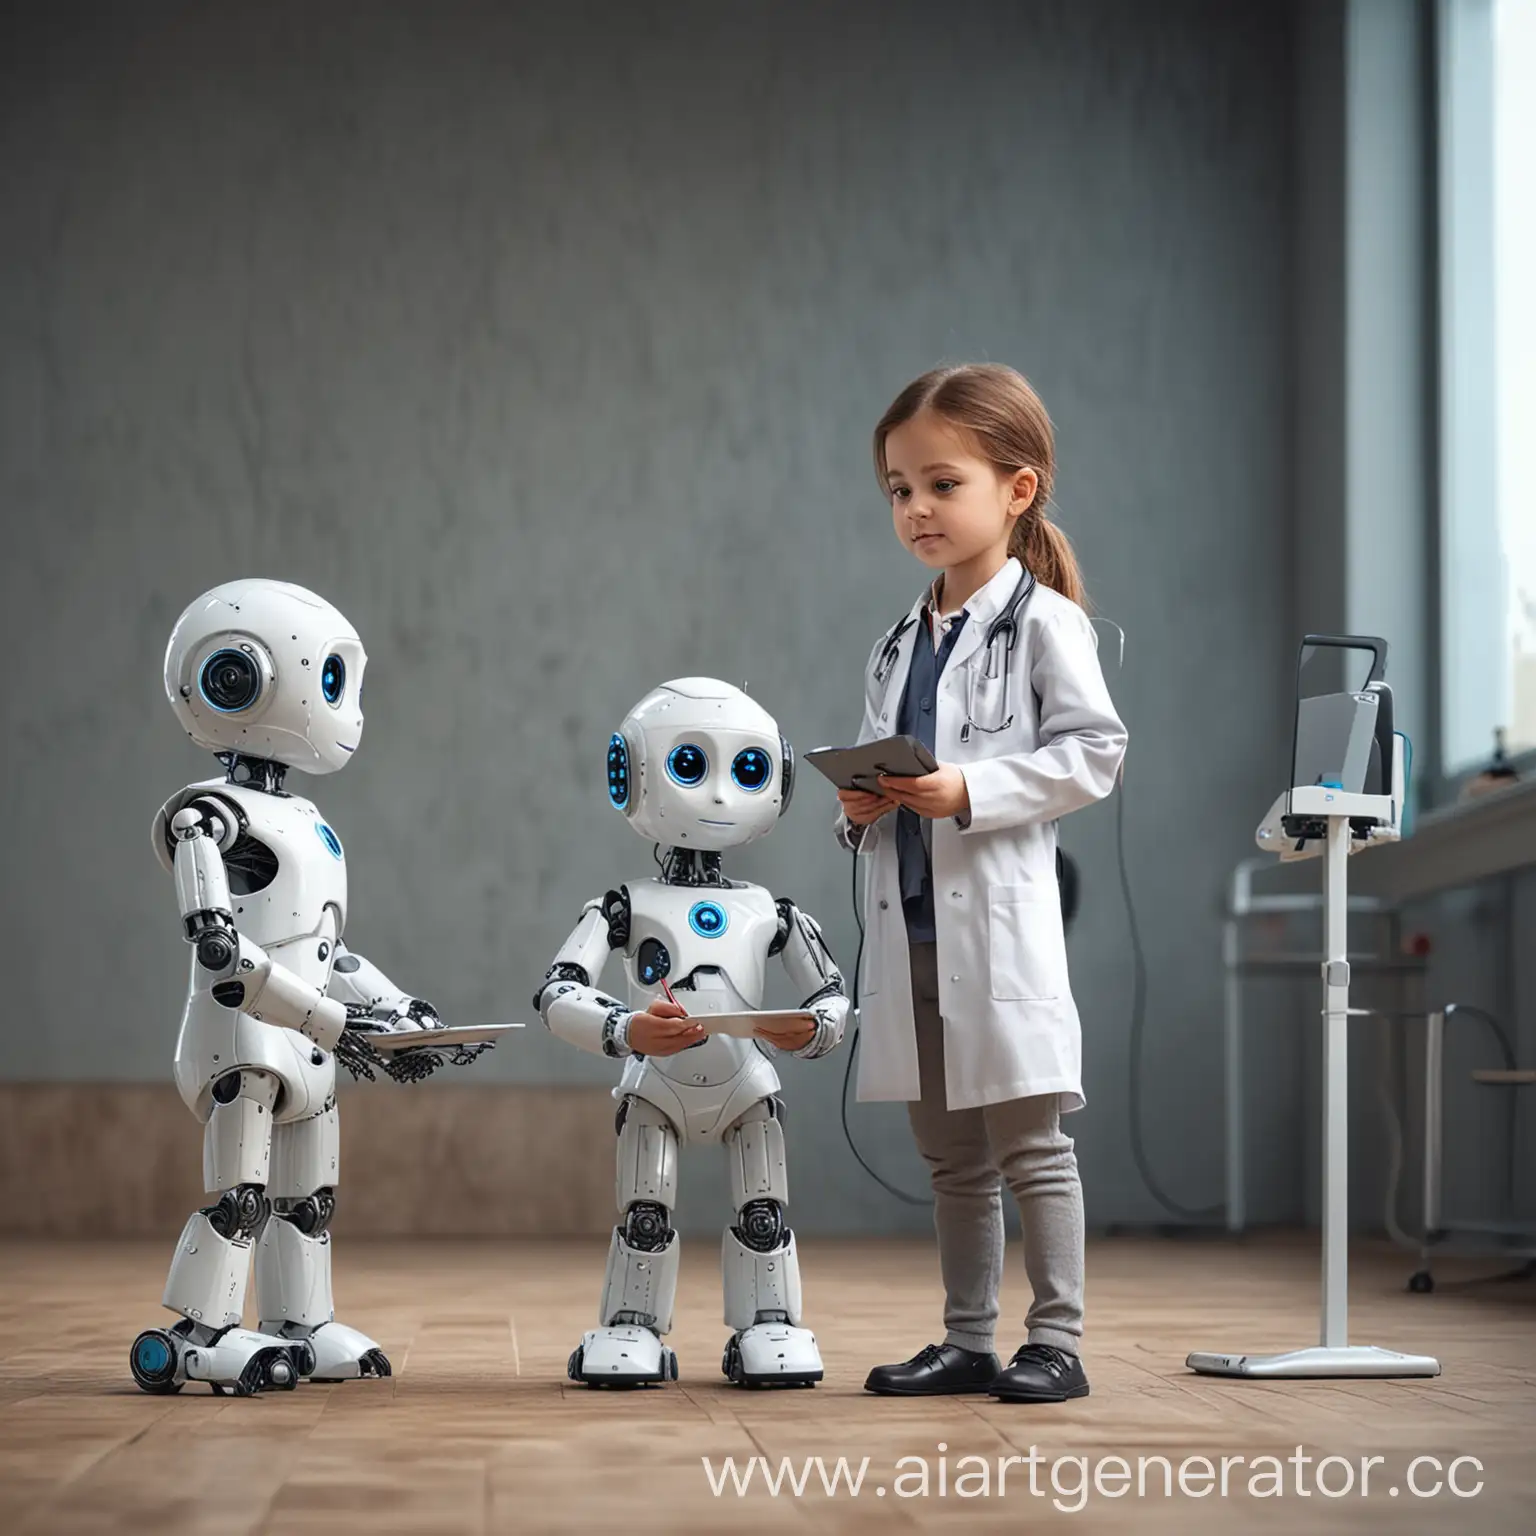 Cute-Robot-Interns-Conducting-Medical-Survey-with-People